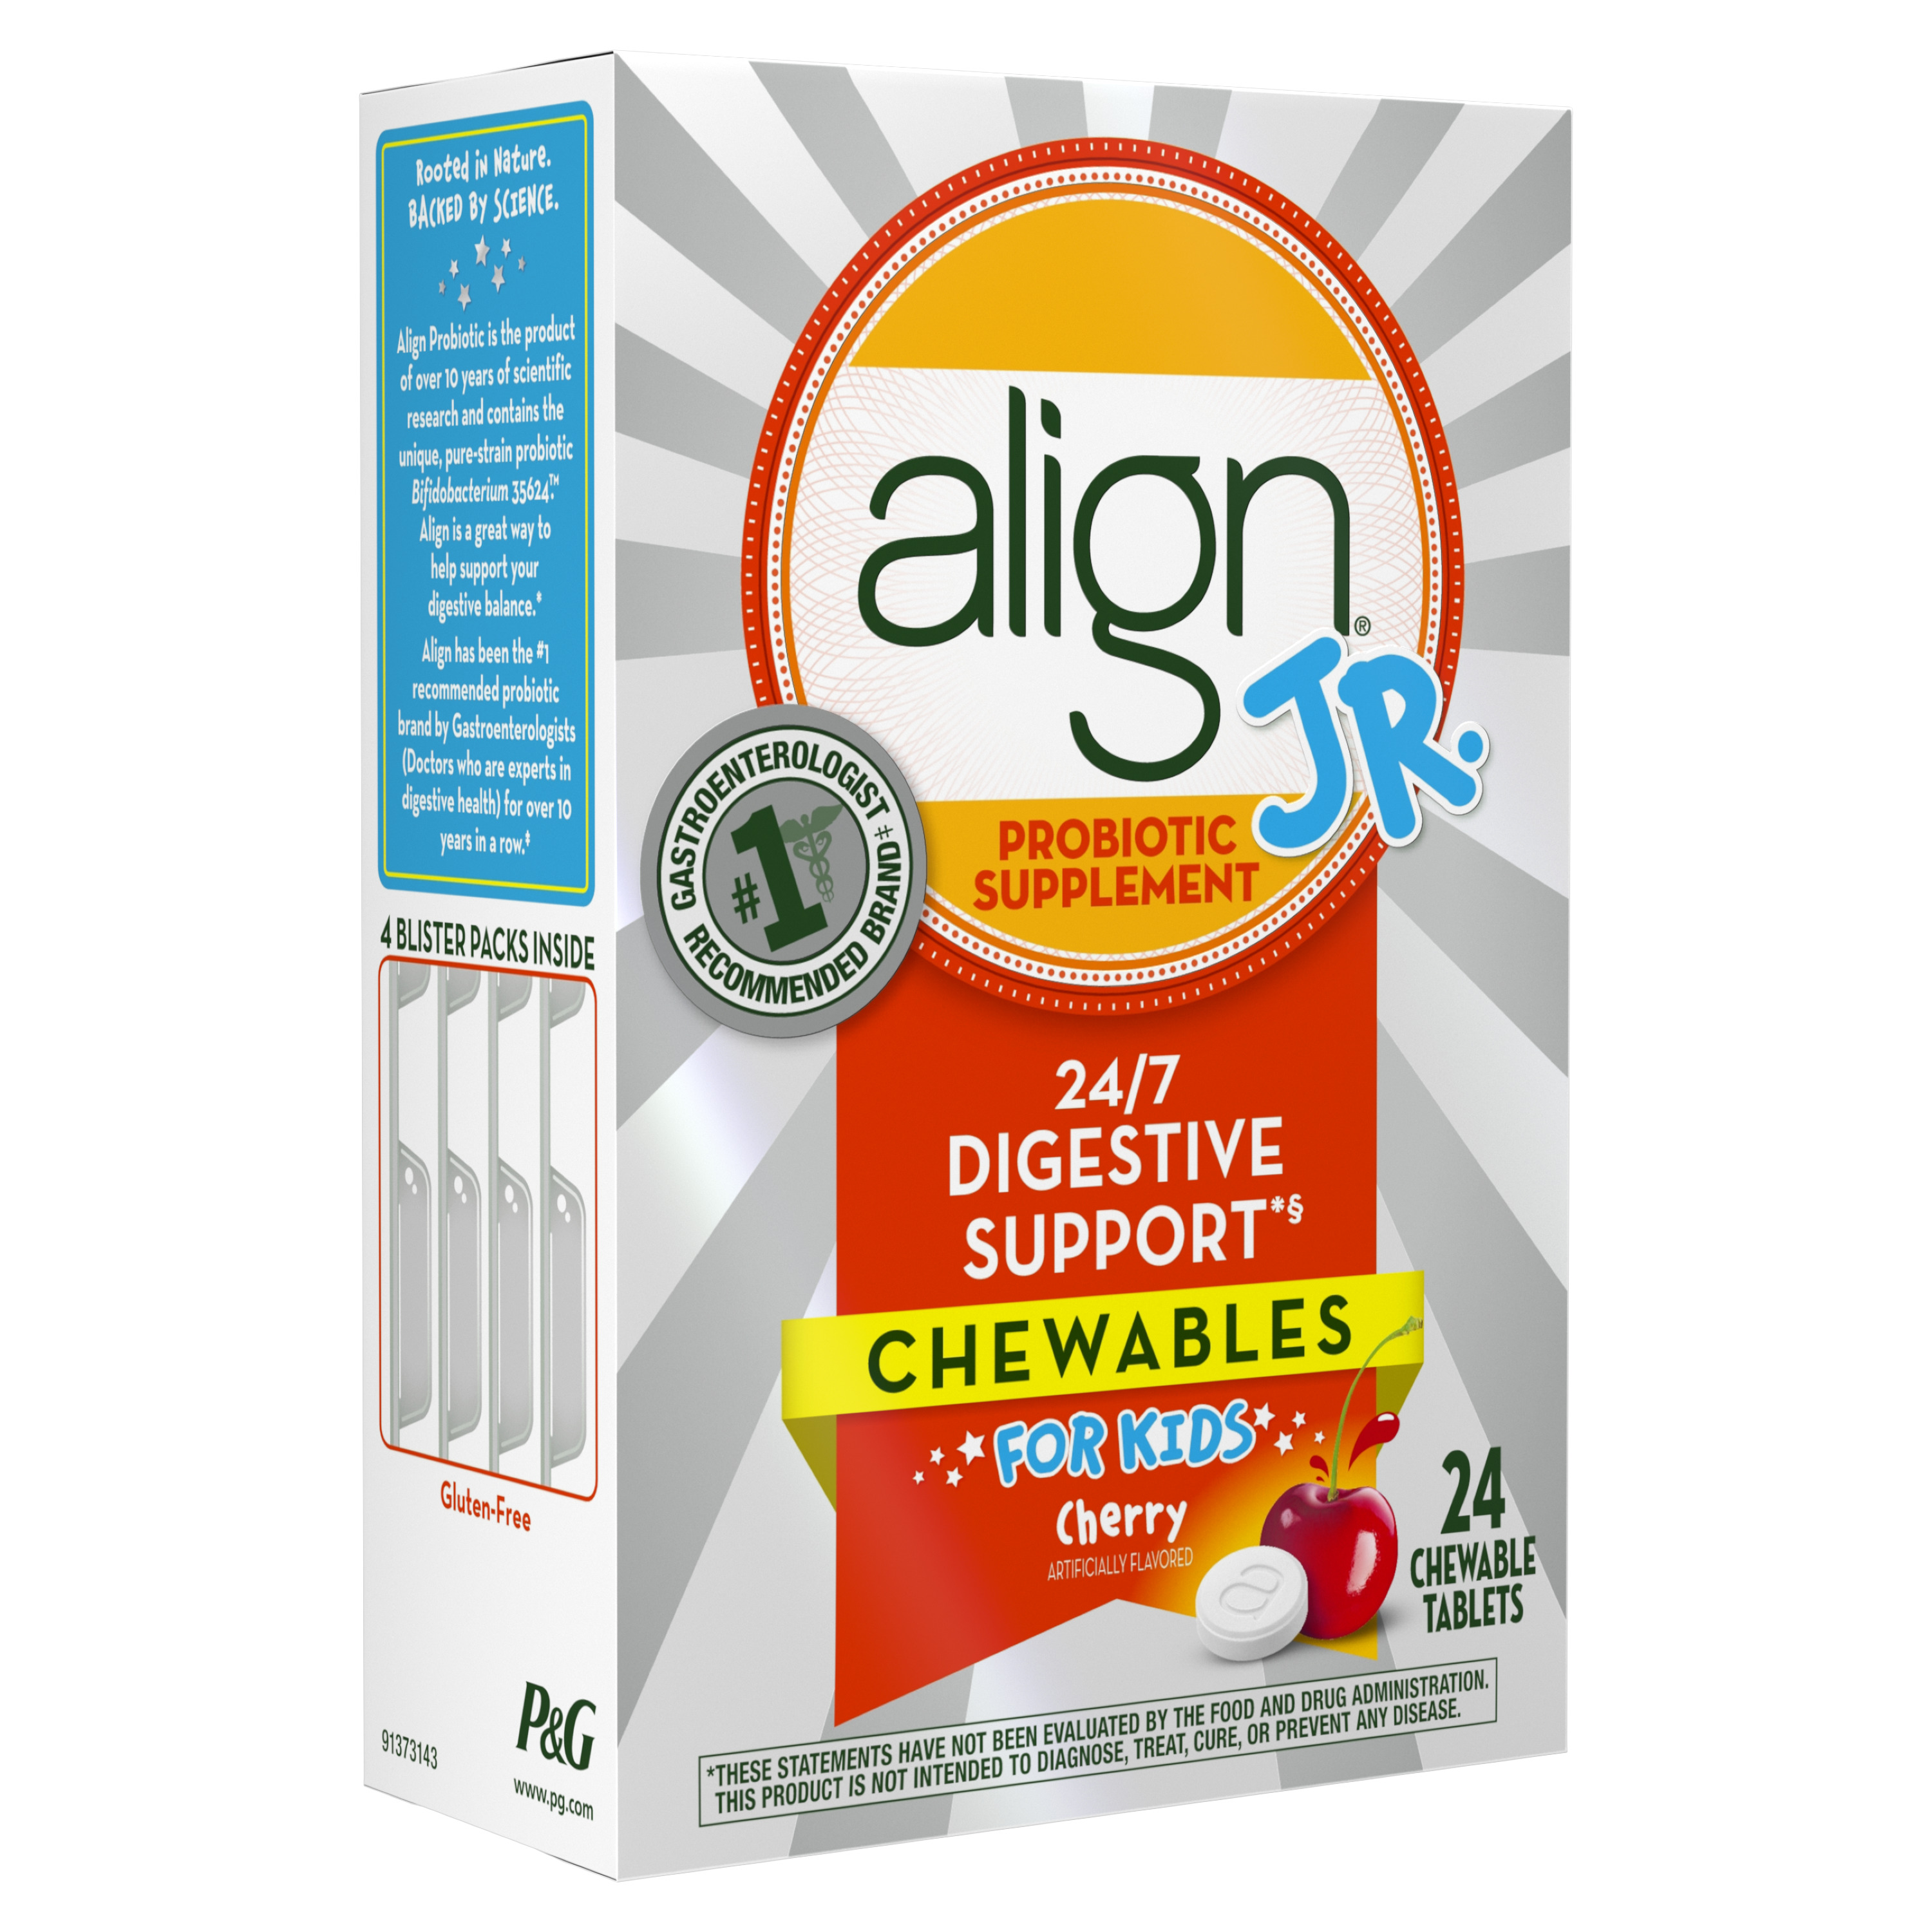 Align Jr. Chewables for Children, Daily Probiotic Supplement for Kids Digestive Health, Cherry Smoothie Flavor, 24 count, #1 Recommended Probiotic by Brand by Doctors - image 3 of 6